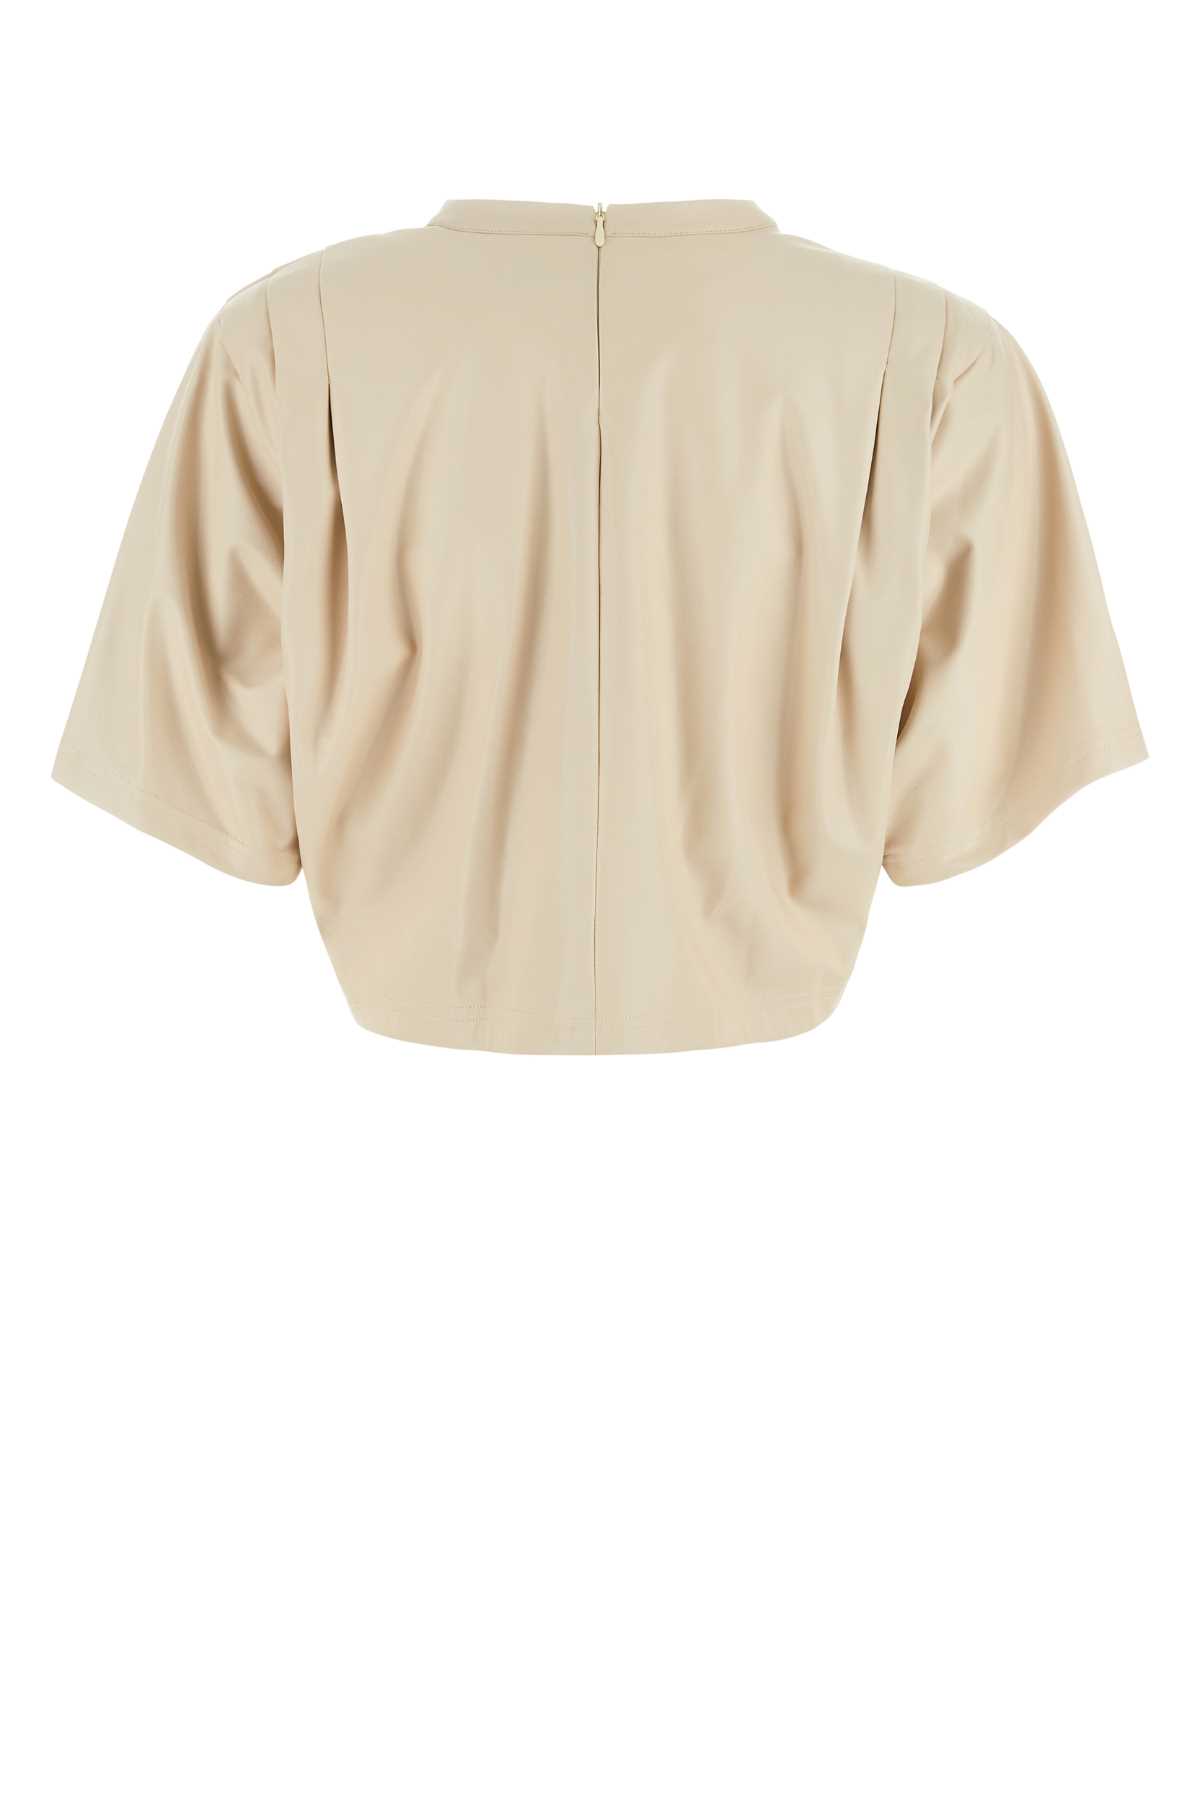 Marant Etoile Sand Synthetic Leather Top In Chalk